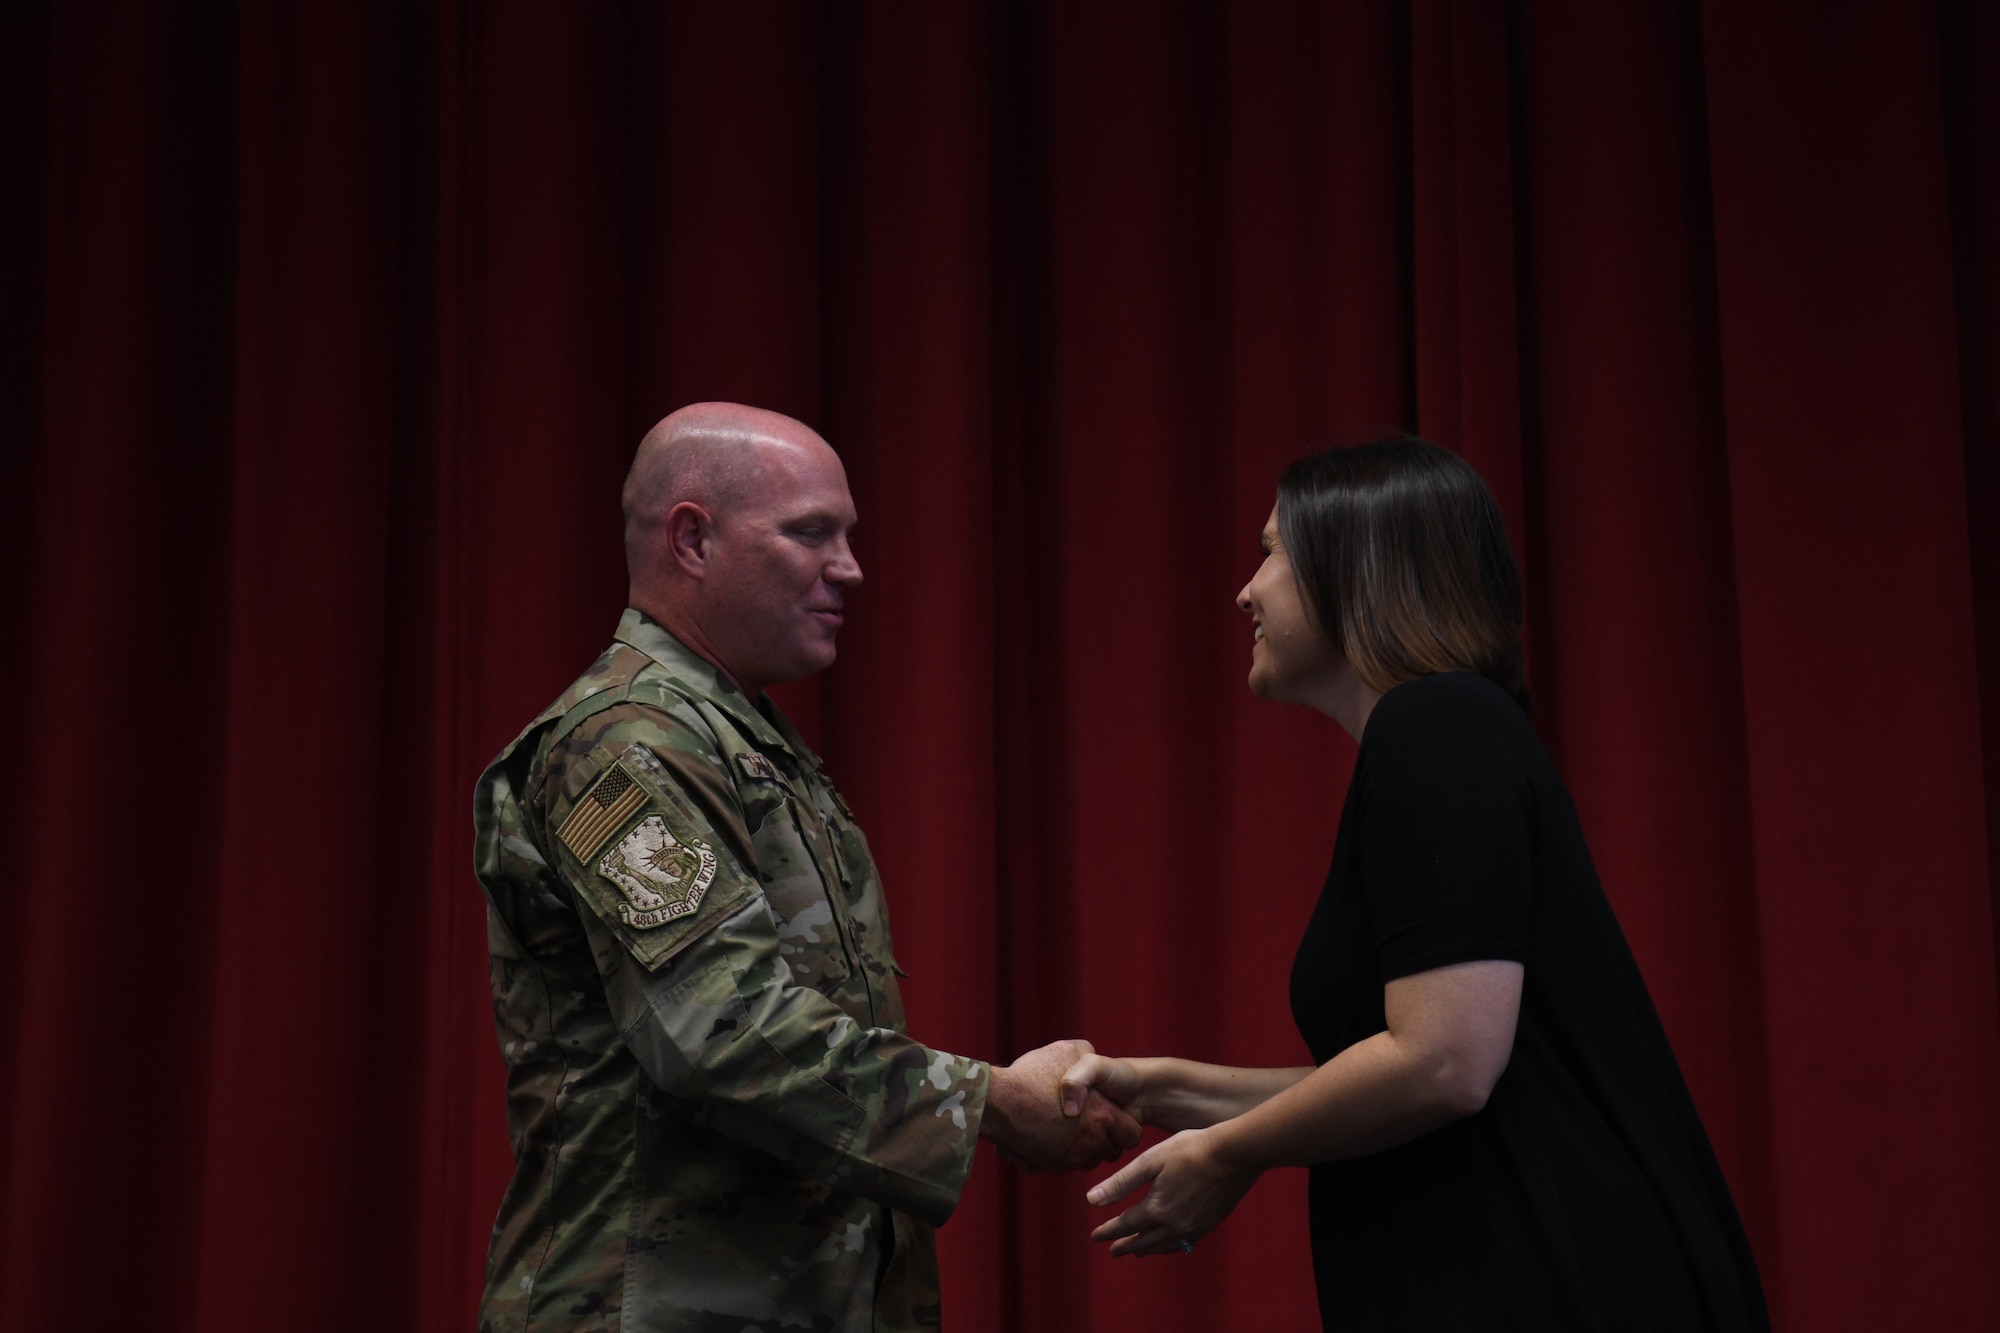 U.S. Air Force Col. John Stratton, 48th Fighter Wing vice commander, welcomes a new teacher to the Liberty Wing school community during a forum at Royal Air Force Lakenheath, England, Aug. 29, 2019. Wing leadership had the opportunity to welcome new educators to RAF Lakenheath and RAF Feltwell and share tri-base updates, congratulatory remarks, and execute a coining ceremony to commemorate their induction into the Liberty Wing family. (U.S. Air Force photo by Airman 1st Class Shanice Williams-Jones)